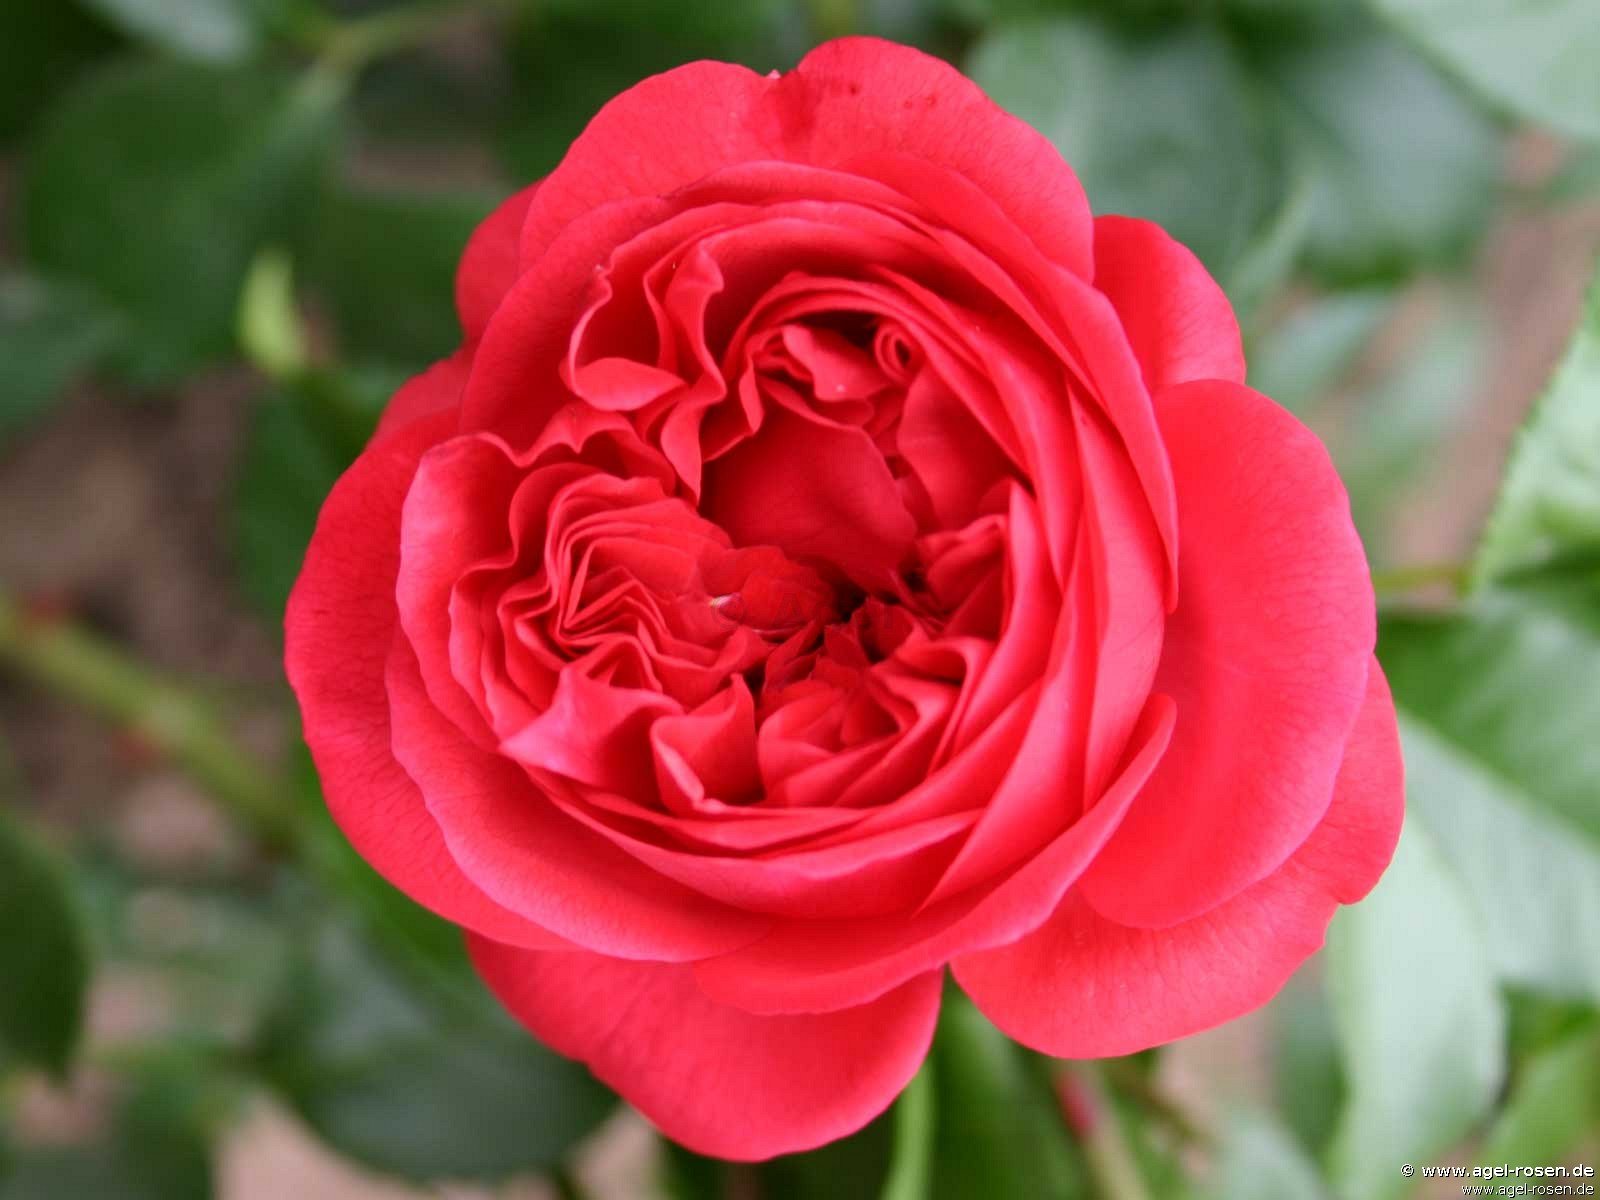 Rose ‘Out of Rosenheim‘ (wurzelnackte Rose)